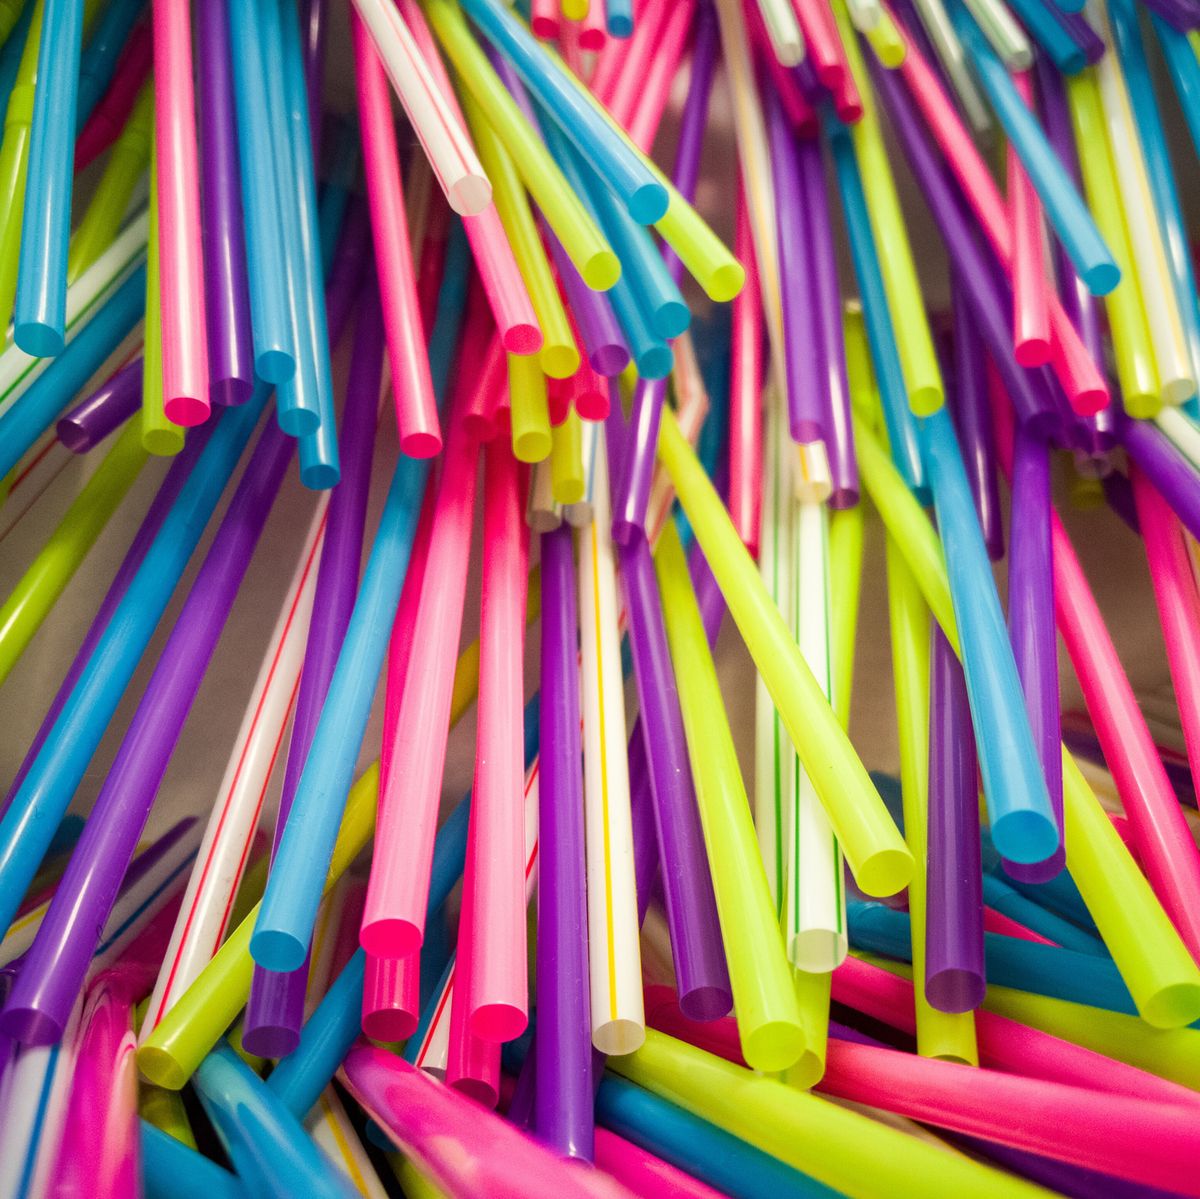 https://hips.hearstapps.com/hmg-prod/images/close-up-of-multi-colored-drinking-straws-royalty-free-image-654742629-1531498119.jpg?crop=0.73848xw:1xh;center,top&resize=1200:*